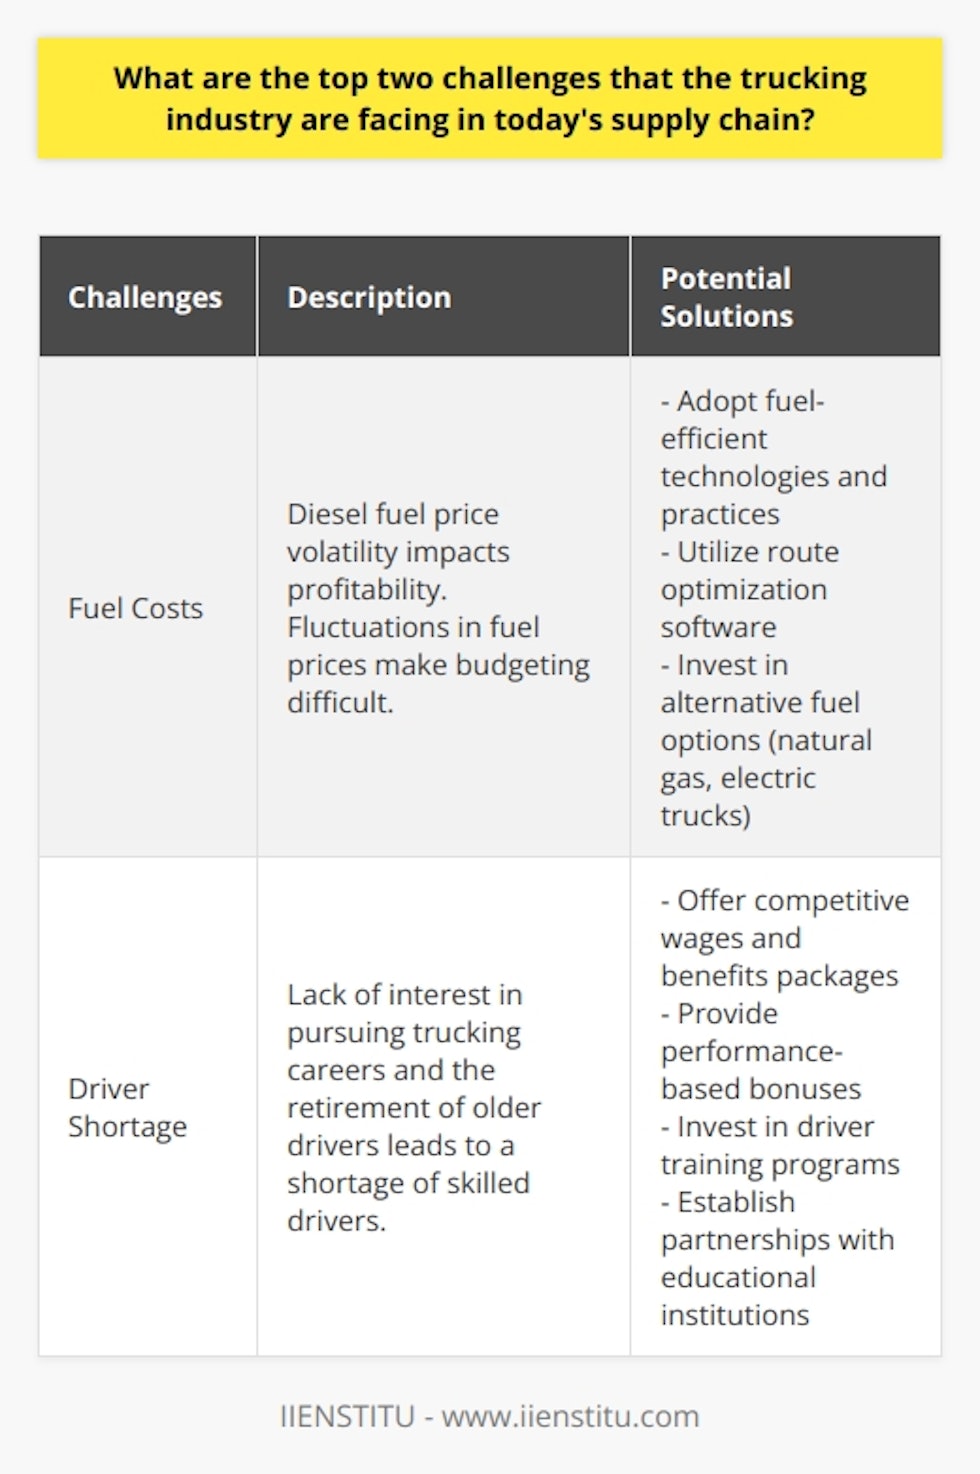 Fuel Costs and Driver Shortage: Challenges in the Trucking IndustryThe trucking industry plays a vital role in today's supply chain, ensuring that goods are transported efficiently from one point to another. However, this industry faces several challenges that impact its operations and profitability. In this article, we will discuss the top two challenges faced by the trucking industry – fuel costs and driver shortage.Fuel costs are a major concern for trucking companies. Diesel fuel, which is essential for trucks, has witnessed volatile price changes in recent years. As trucks consume a significant amount of fuel, especially during long-distance journeys, even small fluctuations in fuel prices can significantly impact a trucking company's profitability. This unpredictability makes it difficult for trucking businesses to accurately budget their operational expenses, creating financial strain and uncertainty.To tackle this challenge, trucking companies need to explore strategies that can help mitigate the impact of fuel costs. This can include adopting fuel-efficient technologies and practices, such as using aerodynamic designs on trucks, implementing speed management systems, and utilizing route optimization software to reduce fuel consumption. Additionally, the industry can invest in alternative fuel options, such as natural gas or electric trucks, to decrease dependency on diesel fuel and reduce costs in the long run.The second major challenge faced by the trucking industry is the shortage of trained drivers. Younger generations are showing less interest in pursuing a career in truck driving, primarily due to the demanding nature of the job and the long hours spent away from home. This lack of interest, coupled with an aging workforce where older drivers are retiring, has created a significant shortage of skilled drivers in the industry.Trucking companies are struggling to recruit and retain qualified drivers, which hampers their ability to meet the growing demand for transportation services. To address this challenge, companies are implementing various initiatives, such as offering competitive wages, comprehensive benefits packages, and performance-based bonuses to attract and retain drivers. Additionally, investing in driver training programs and partnerships with educational institutions can help create a pipeline of skilled drivers in the industry.In conclusion, the trucking industry faces two significant challenges in today's supply chain – fuel costs and driver shortage. The high cost of fuel directly impacts a trucking company's profitability, while the shortage of trained drivers hinders their ability to meet the increasing demand for transportation services. To overcome these challenges, the industry needs to adopt innovative solutions, such as fuel-efficient technologies and alternative fuels, while also focusing on attracting and retaining a skilled workforce. By addressing these challenges, the trucking industry can ensure a smooth and efficient supply chain operation.